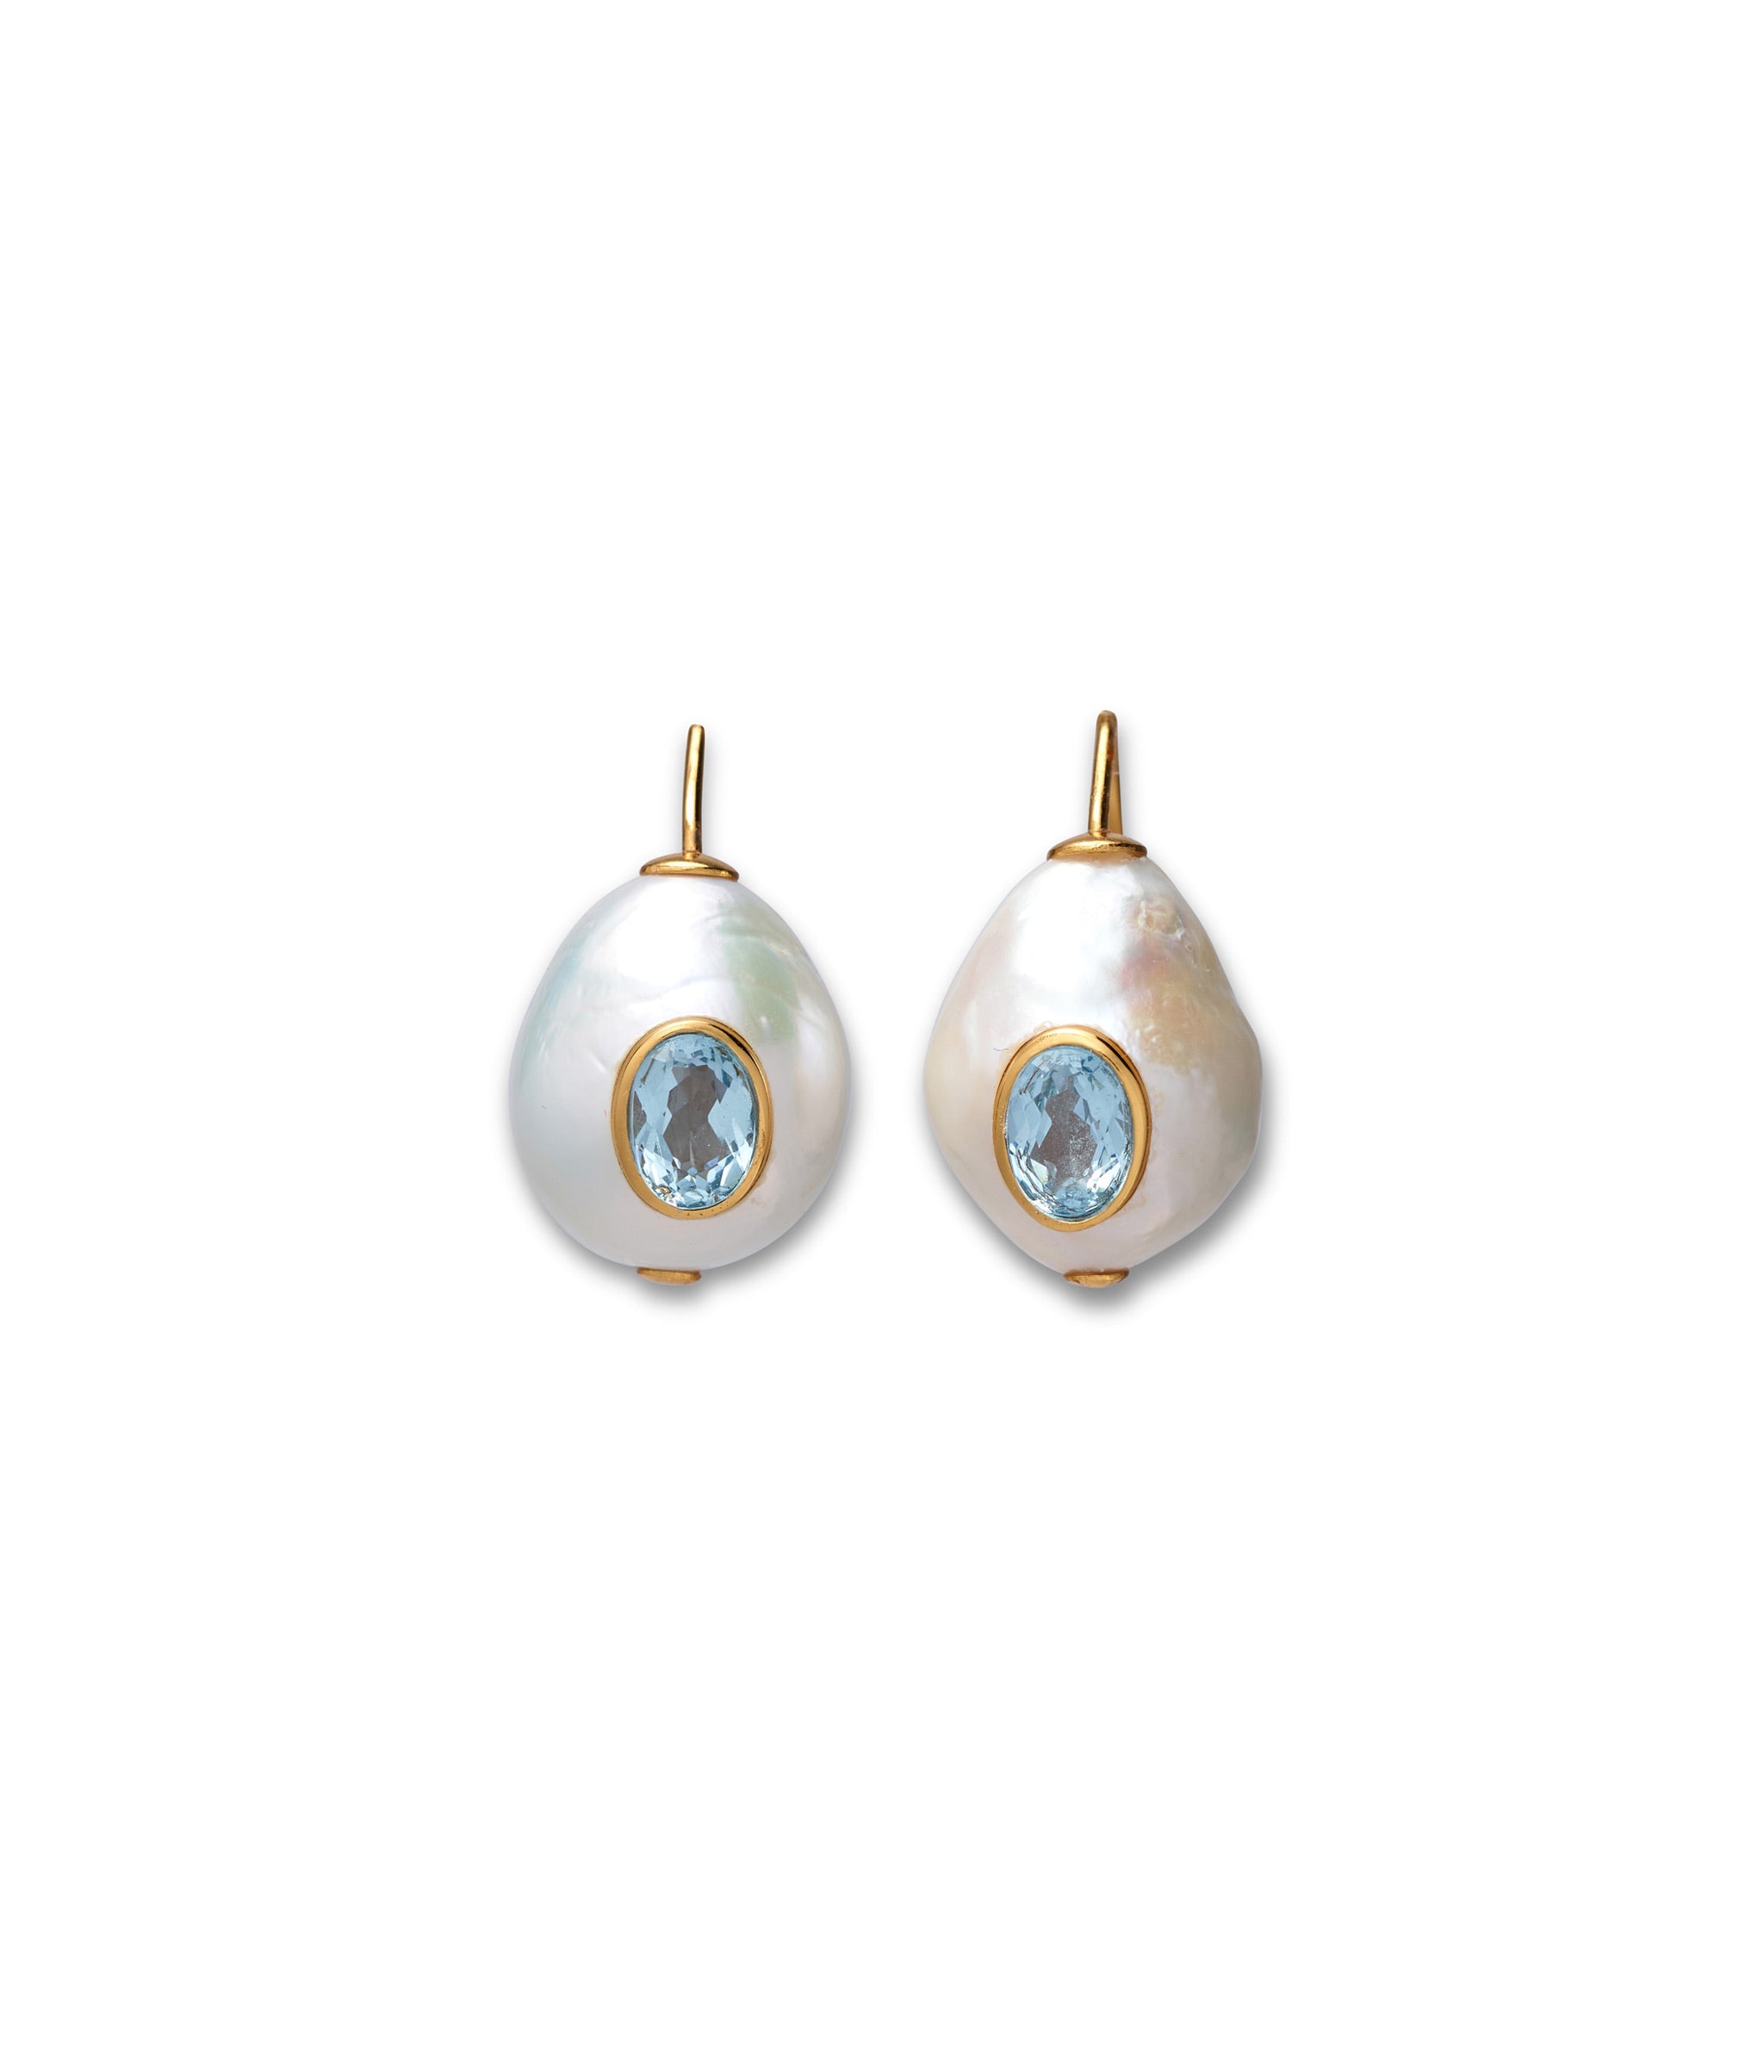 Pearl Pablo Earrings in Blue Topaz. Gold ear wires with freshwater pearl drops inlaid with faceted sky blue topaz stones.